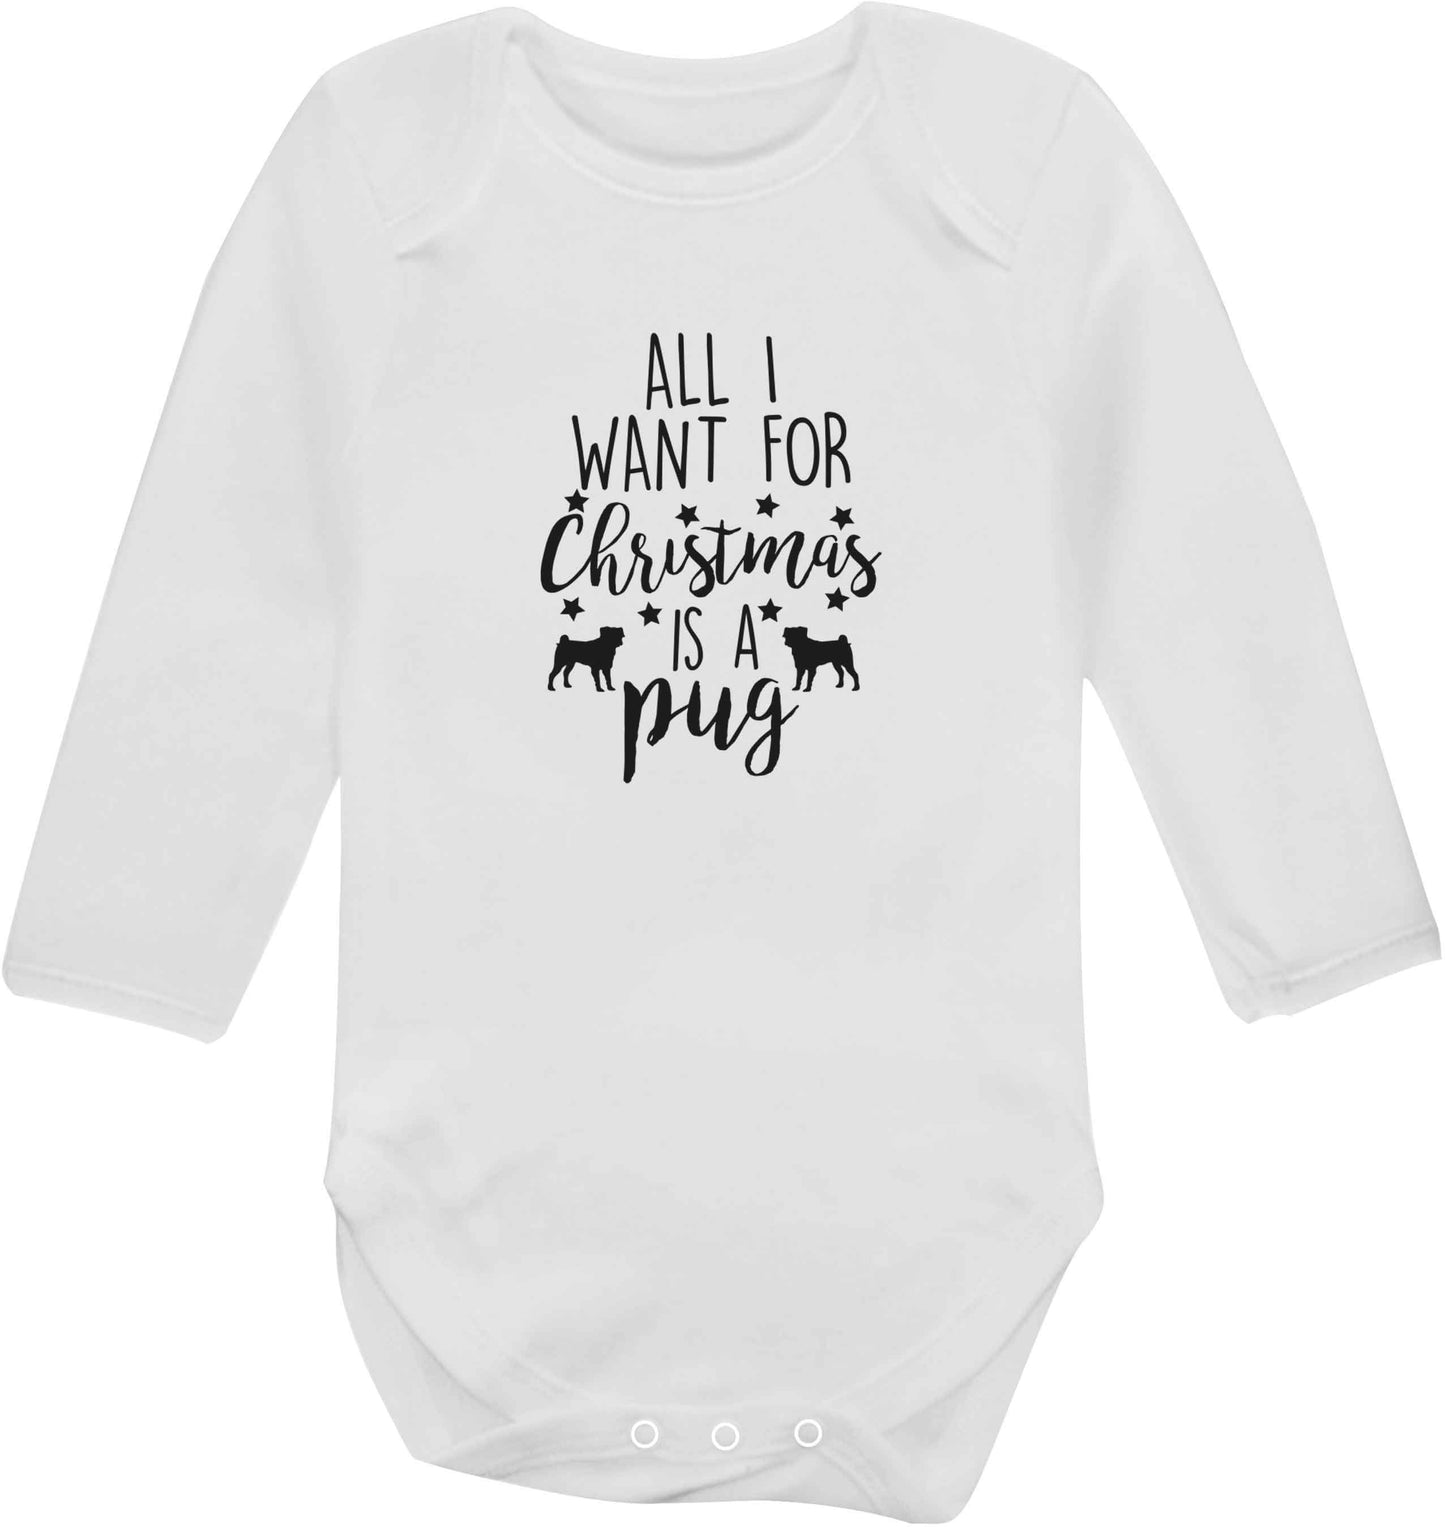 All I want for Christmas is a pug baby vest long sleeved white 6-12 months